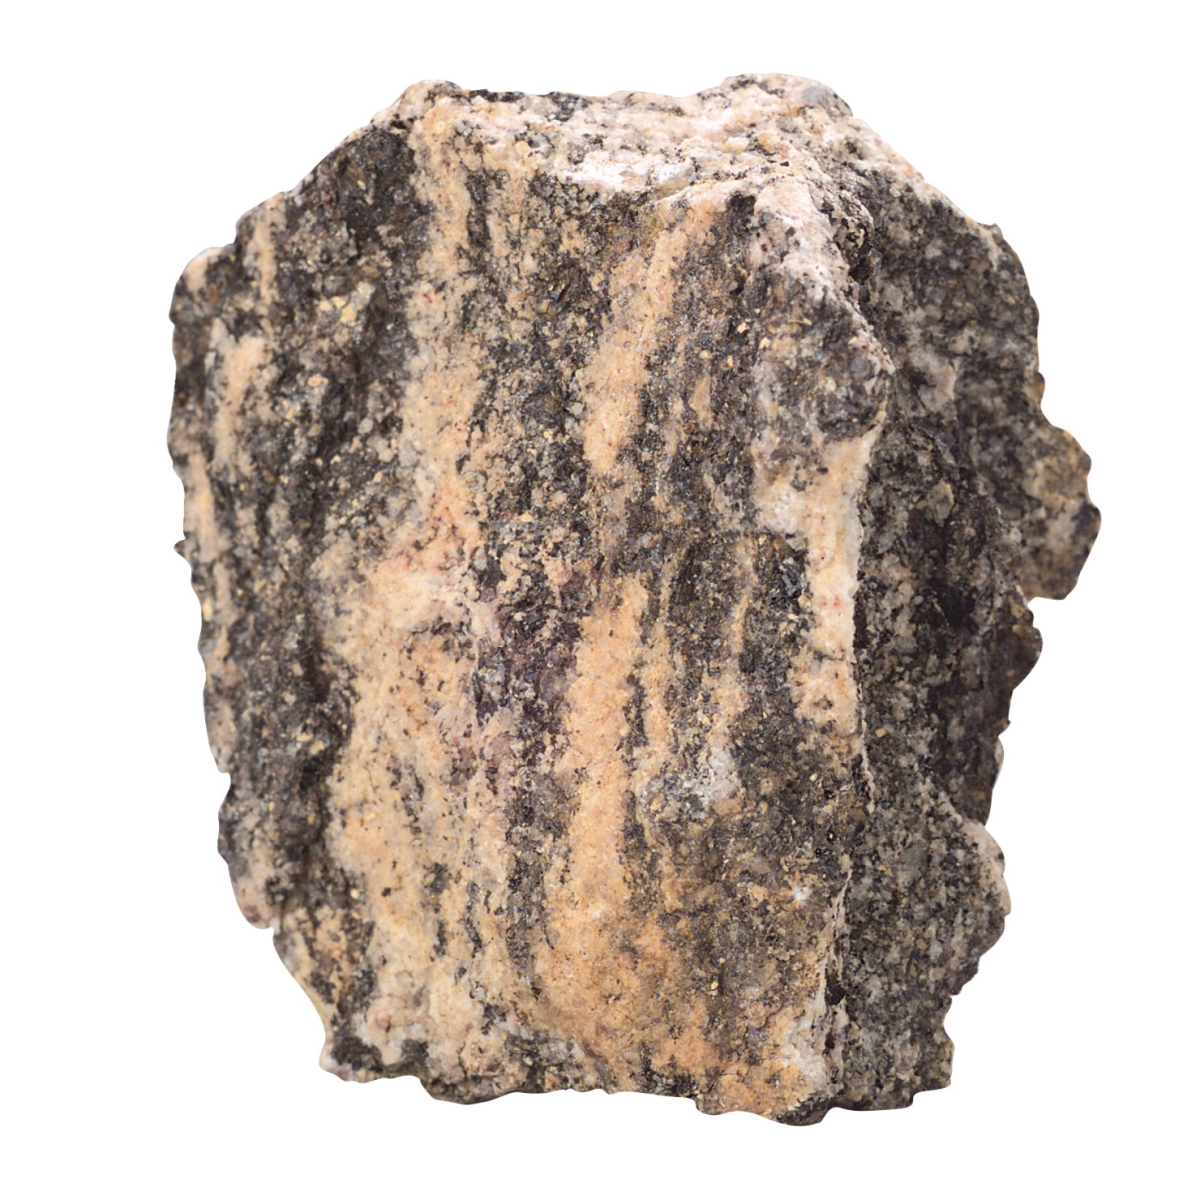 586402 Scott Resources Student Coarse-grained Banded Gneiss - Pack Of 10